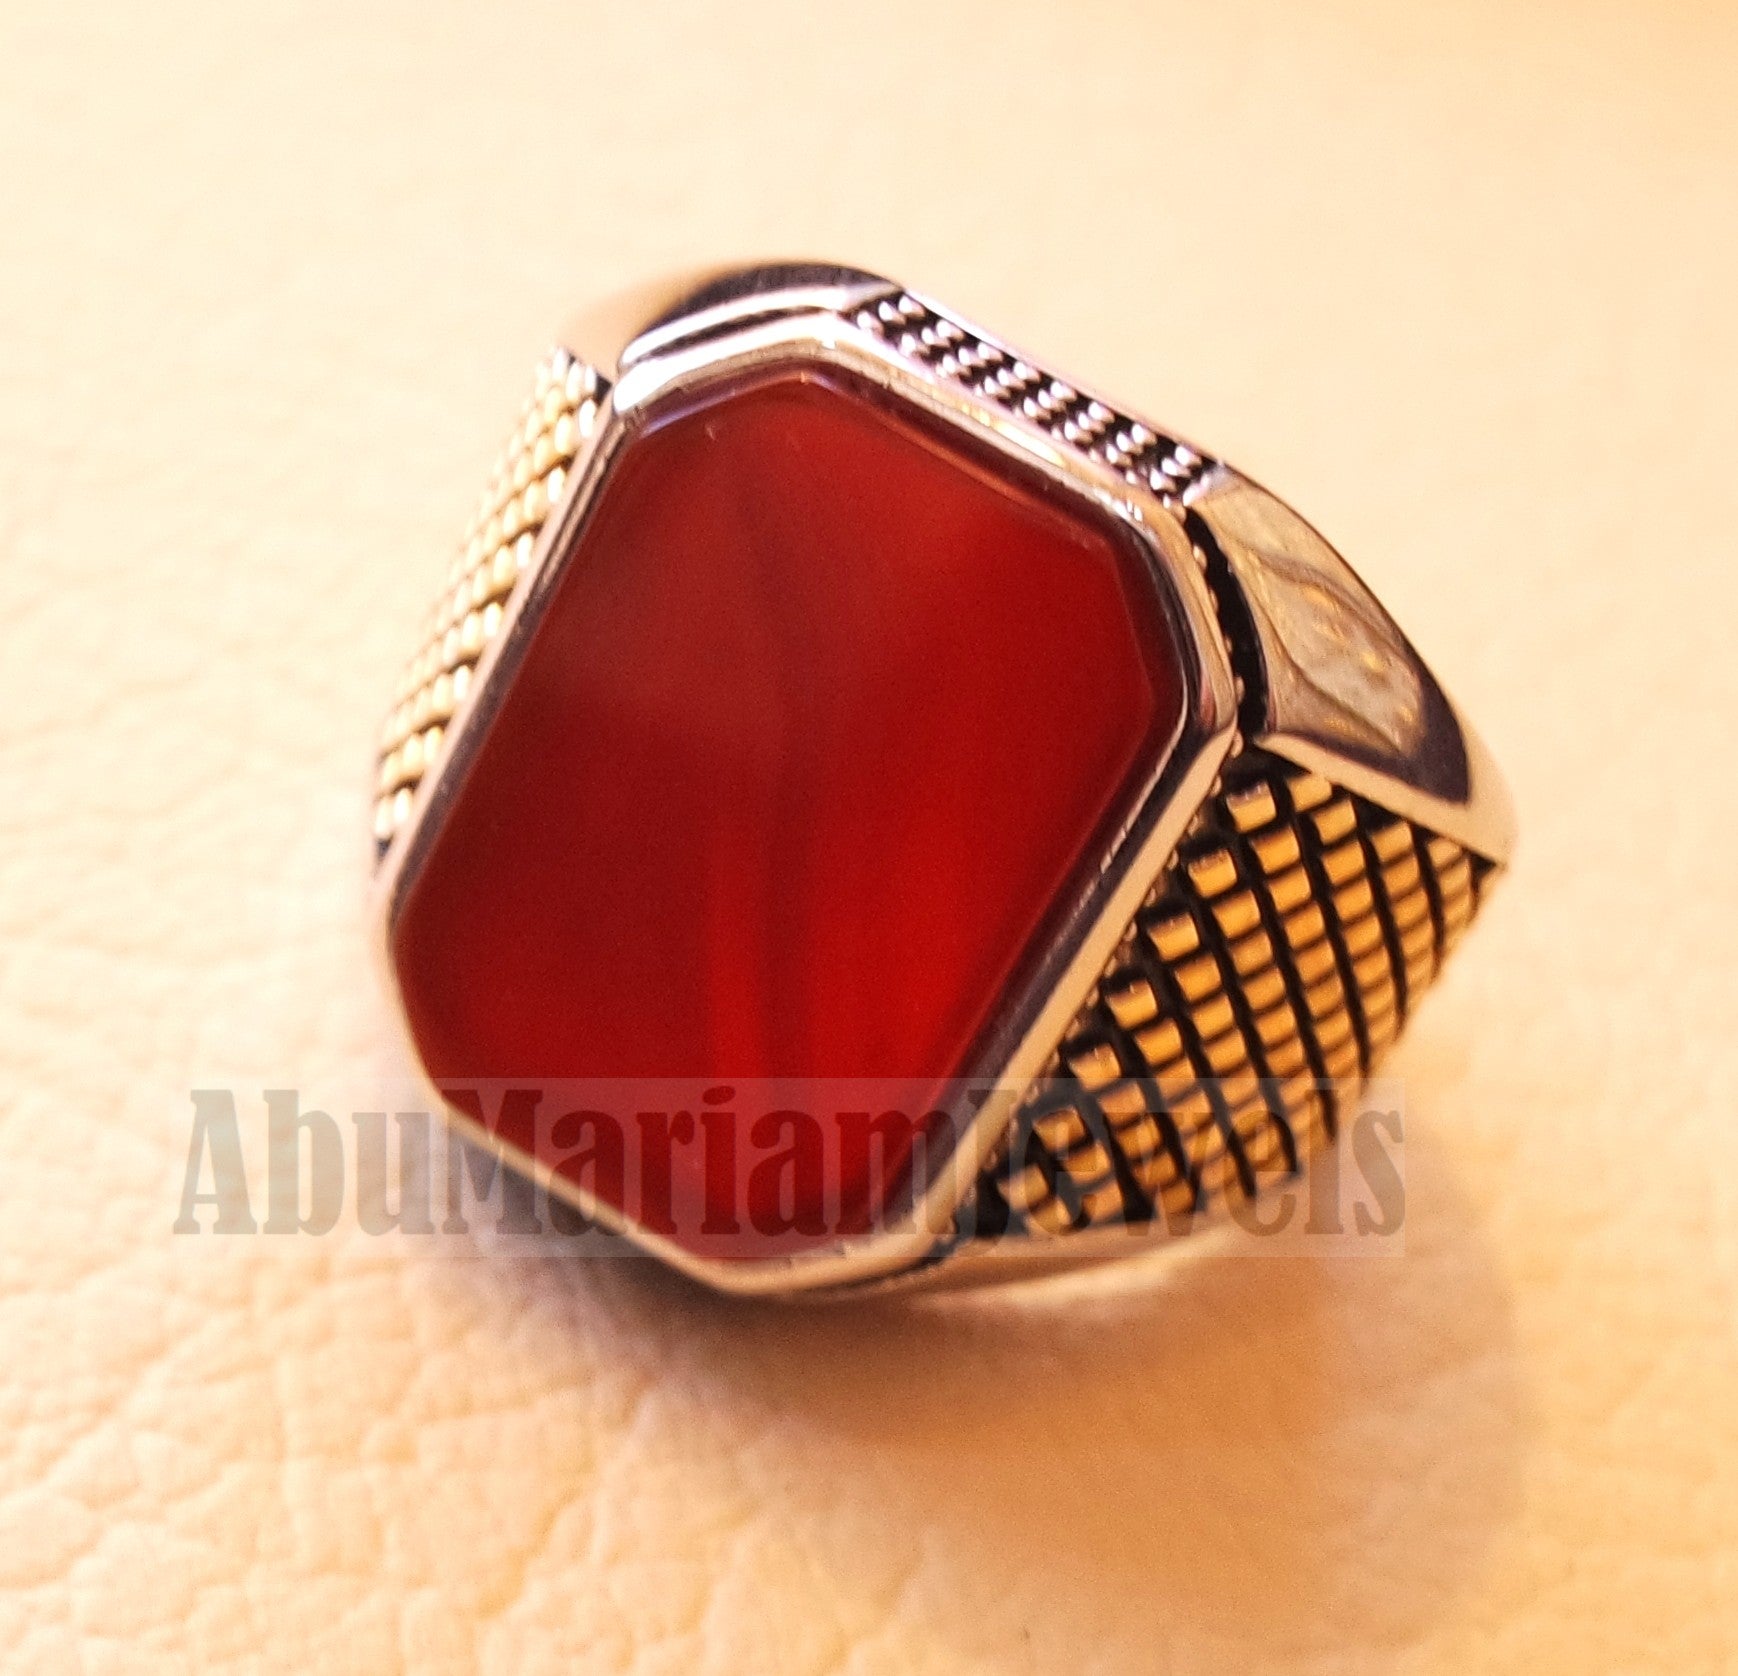 rectangular octagon agate red aqeeq carnelian man ring sterling silver 925 Yellow 14 k plated sides natural stone gem all sizes jewelry